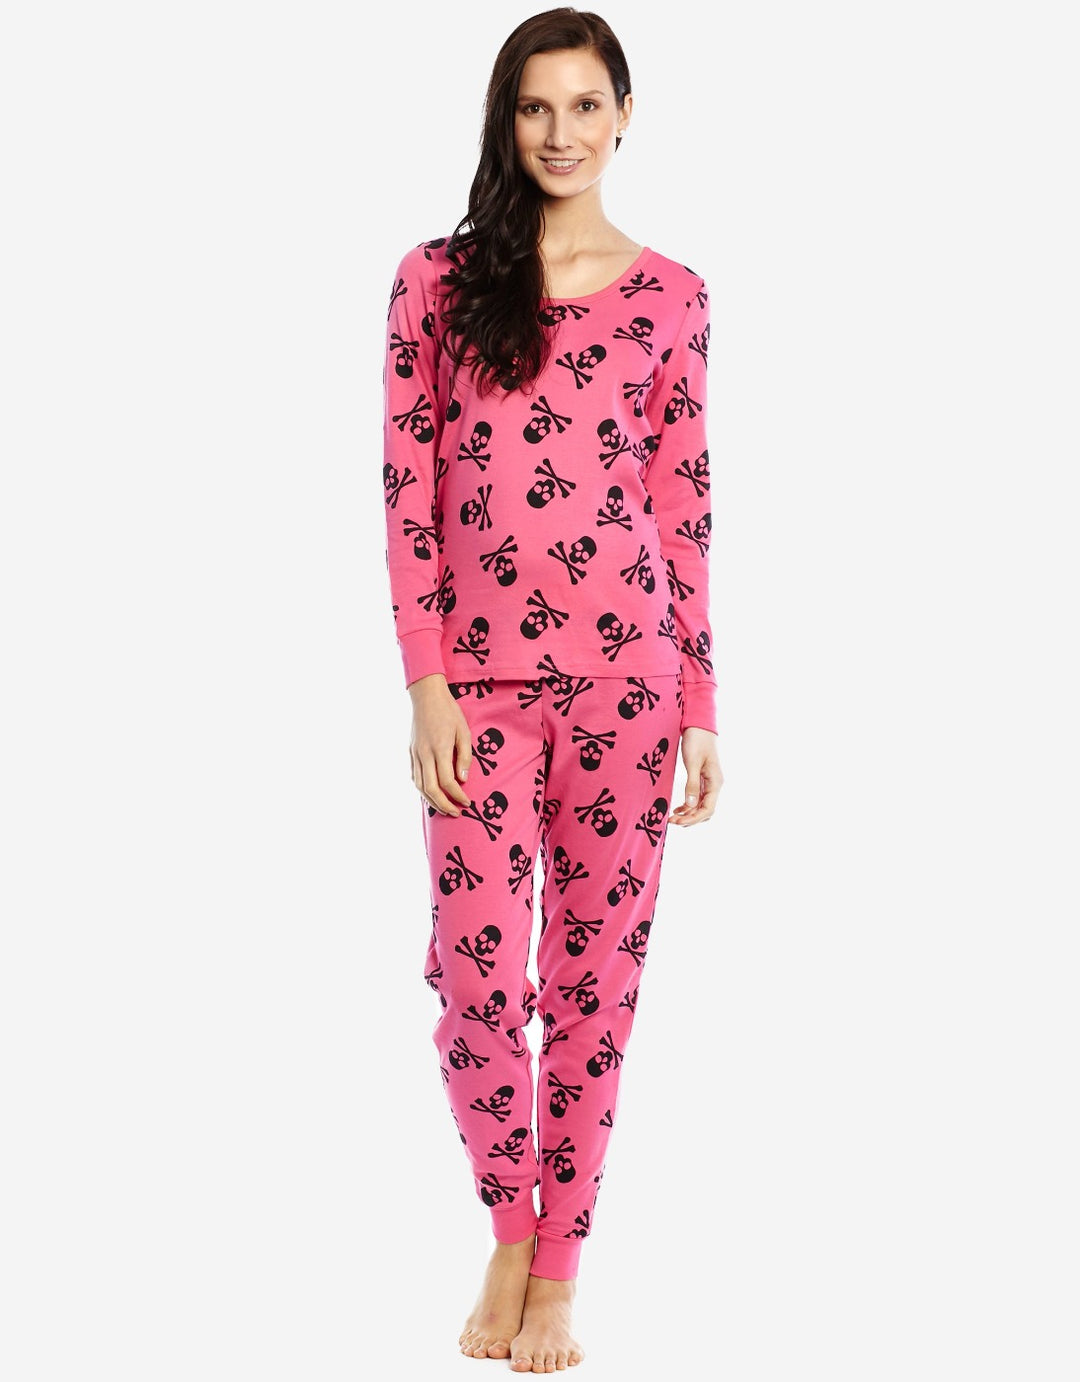 blue or pink skull halloween pajamas for matching family